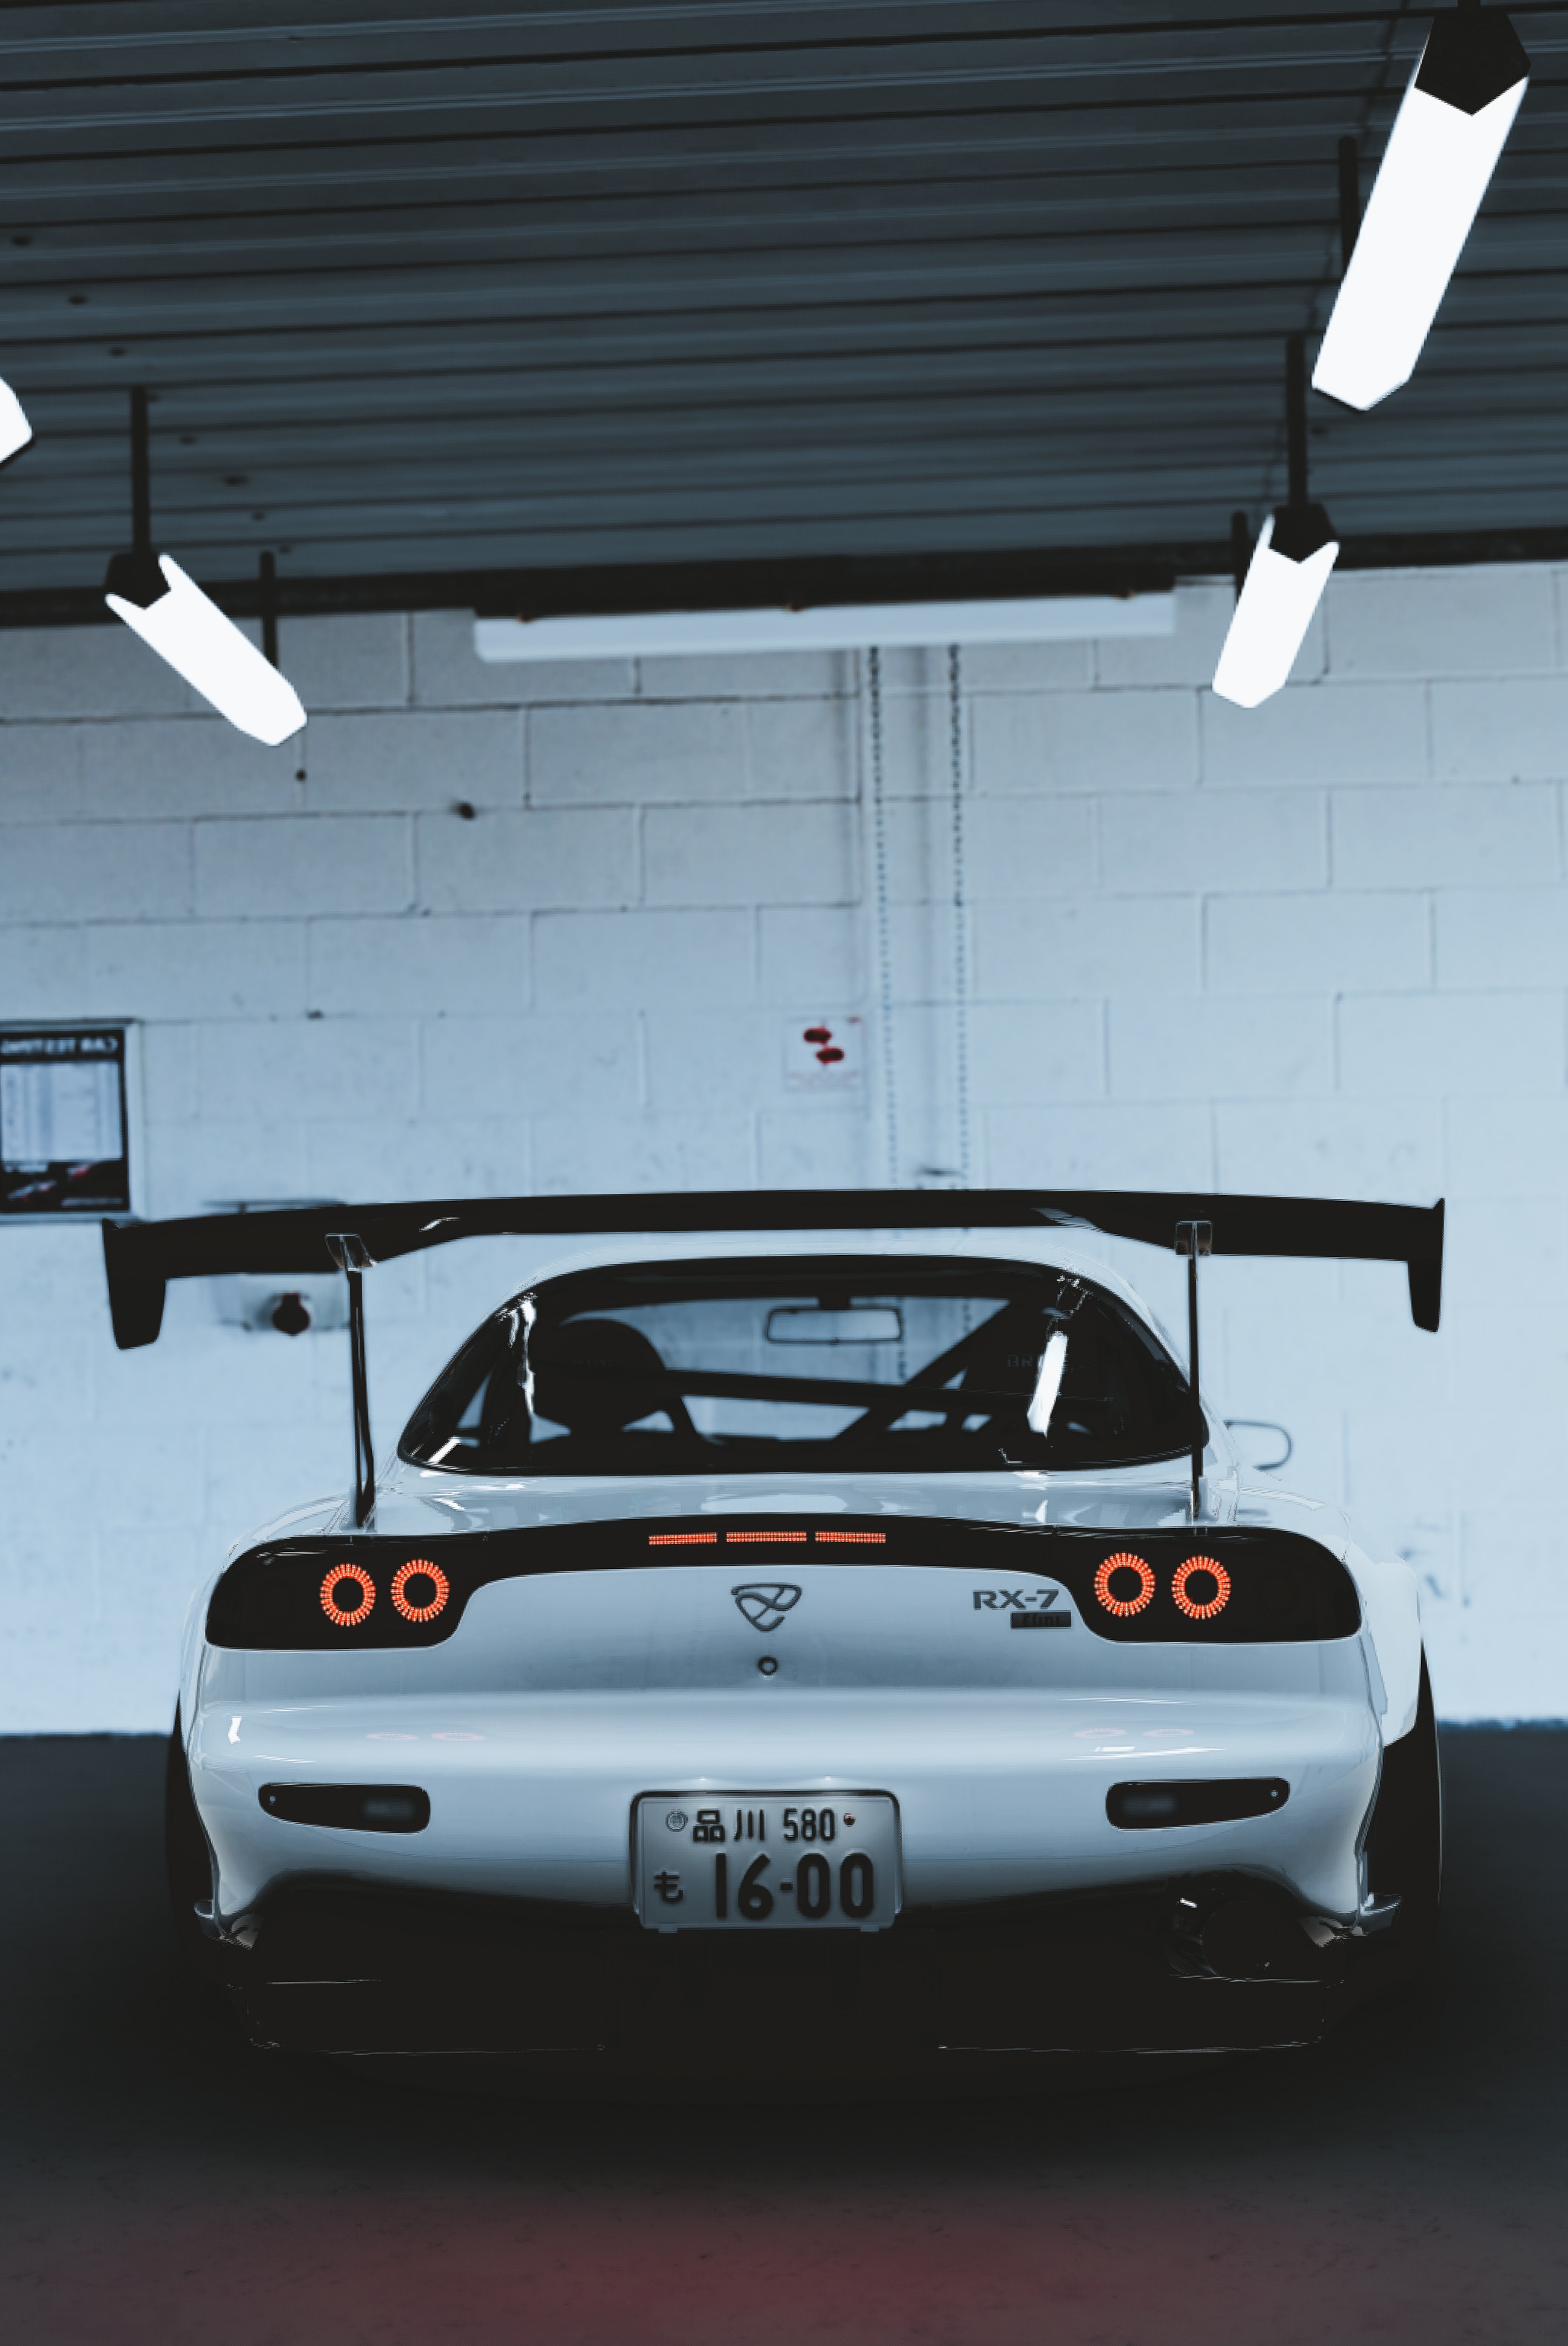 Mazda Rx-7 Wallpapers